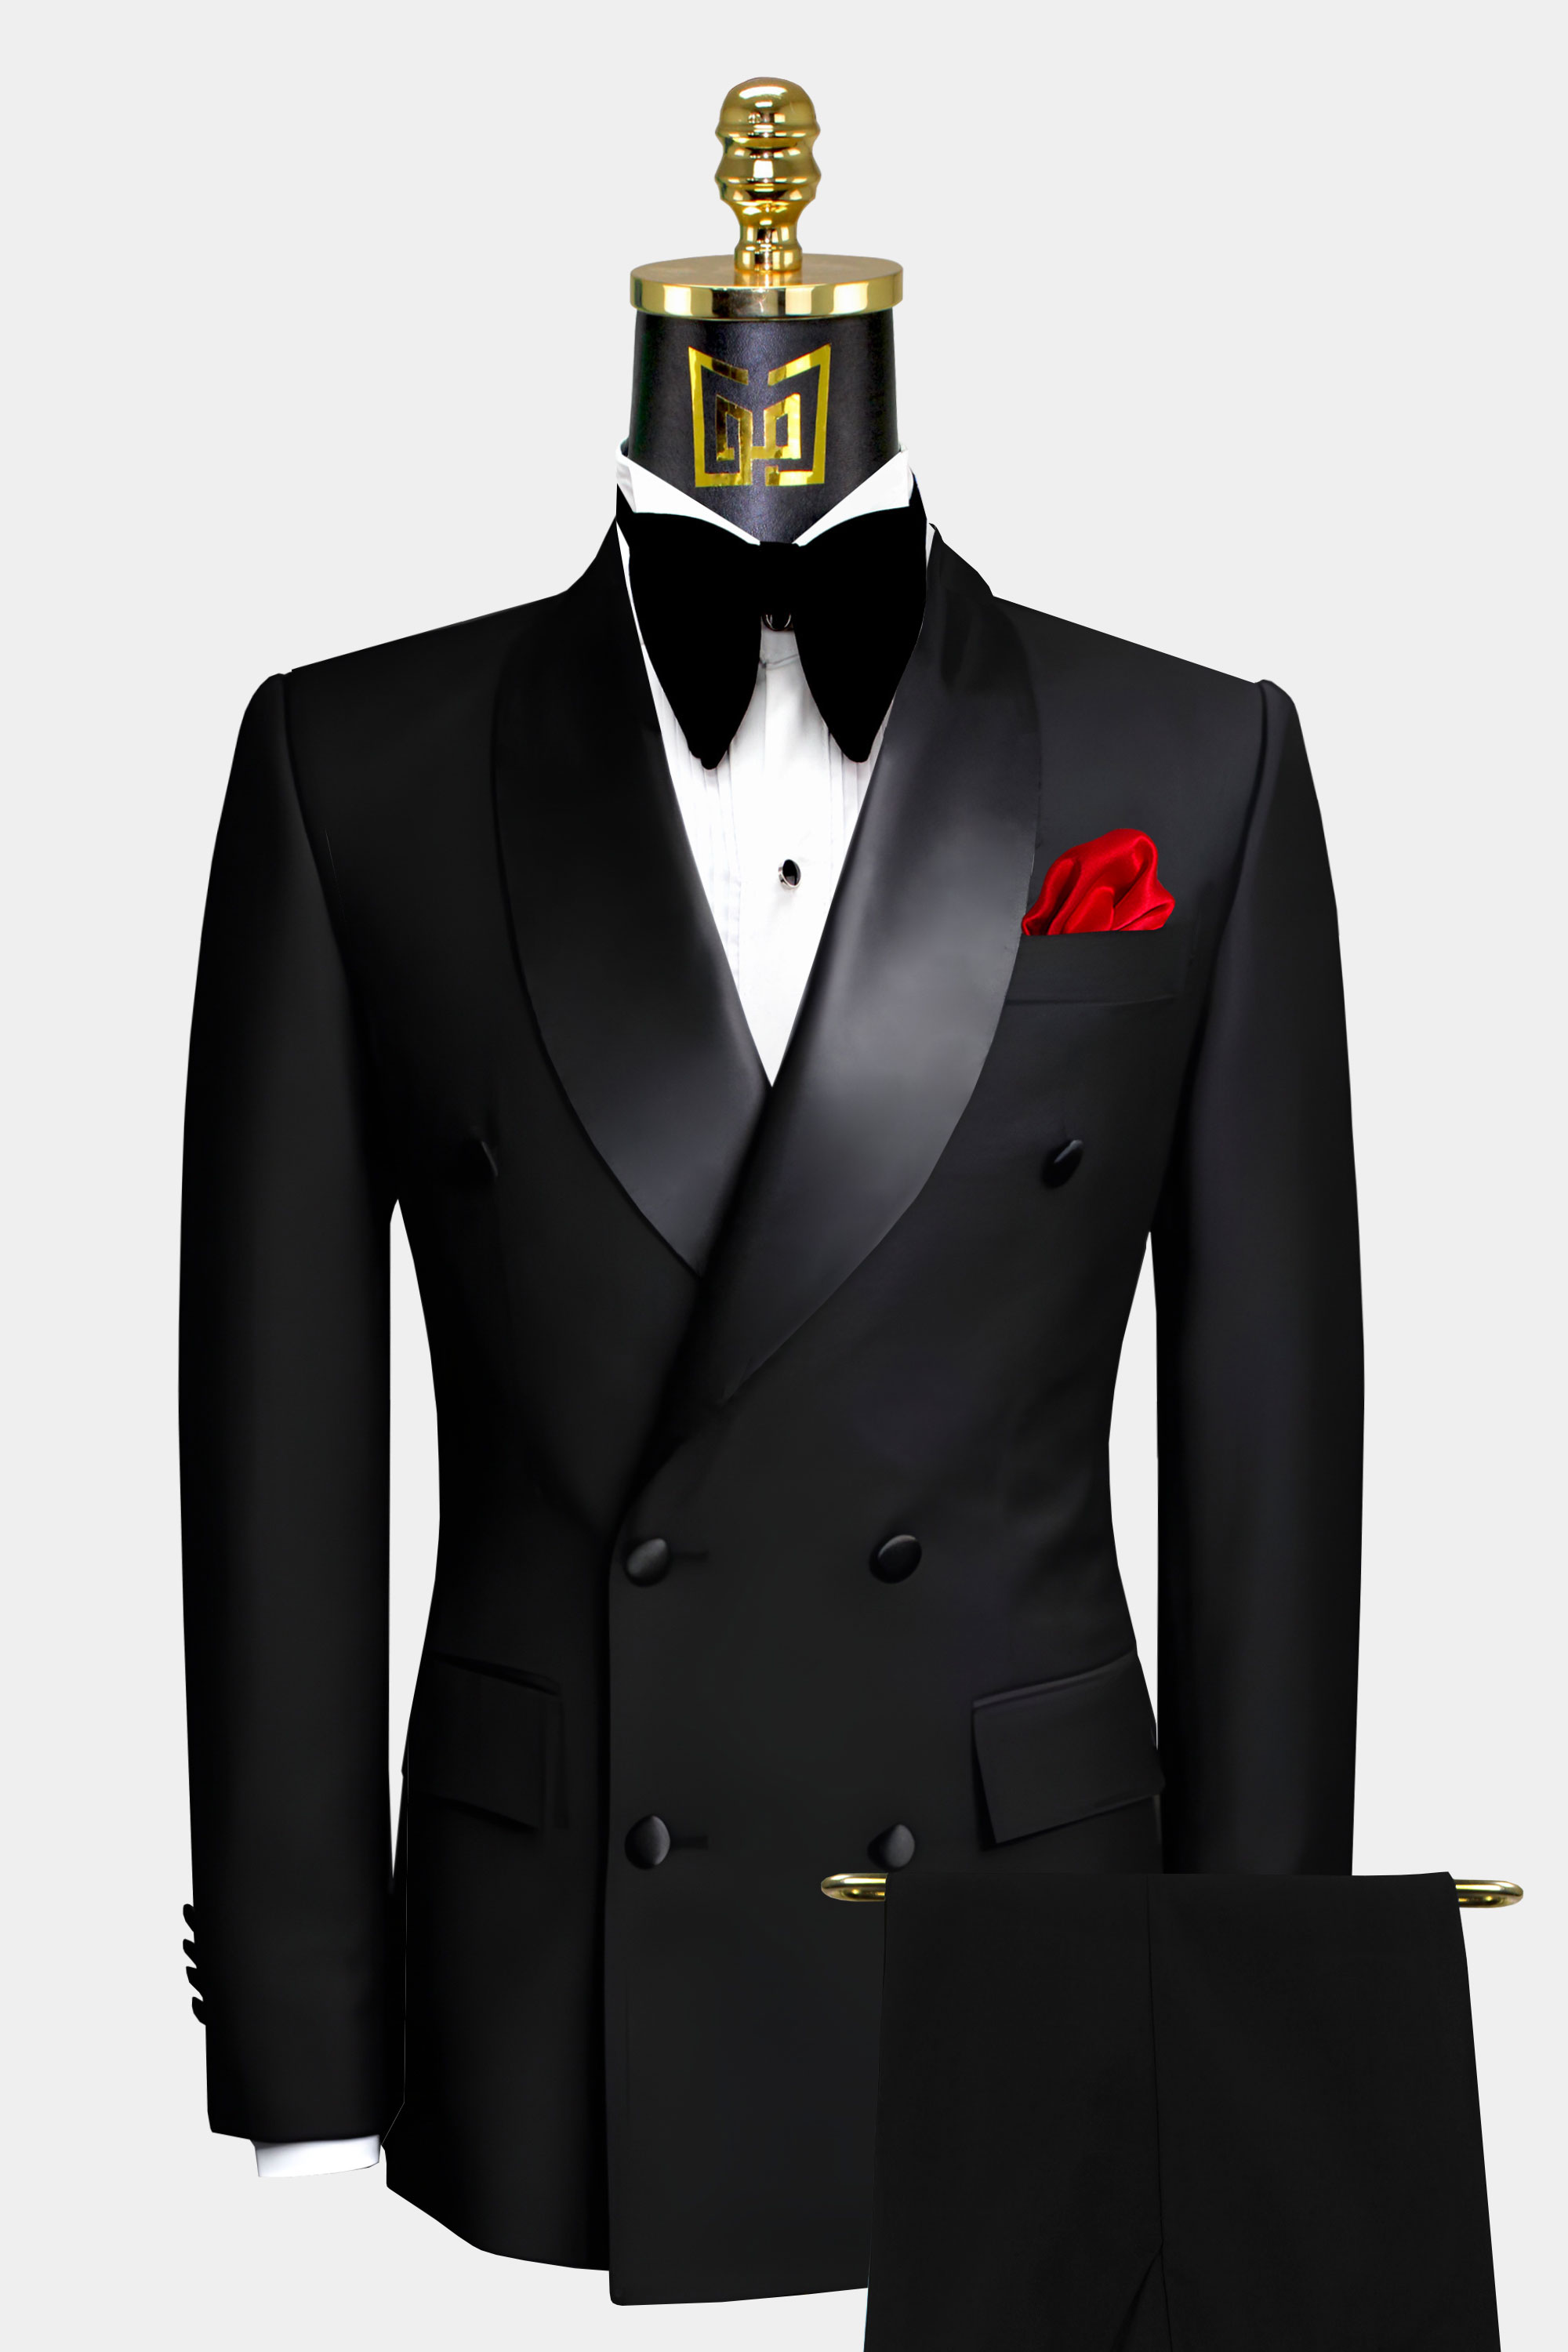 Double Breasted Black Men Suits For Wedding Piece Slim Fit Groom Tuxedo ...